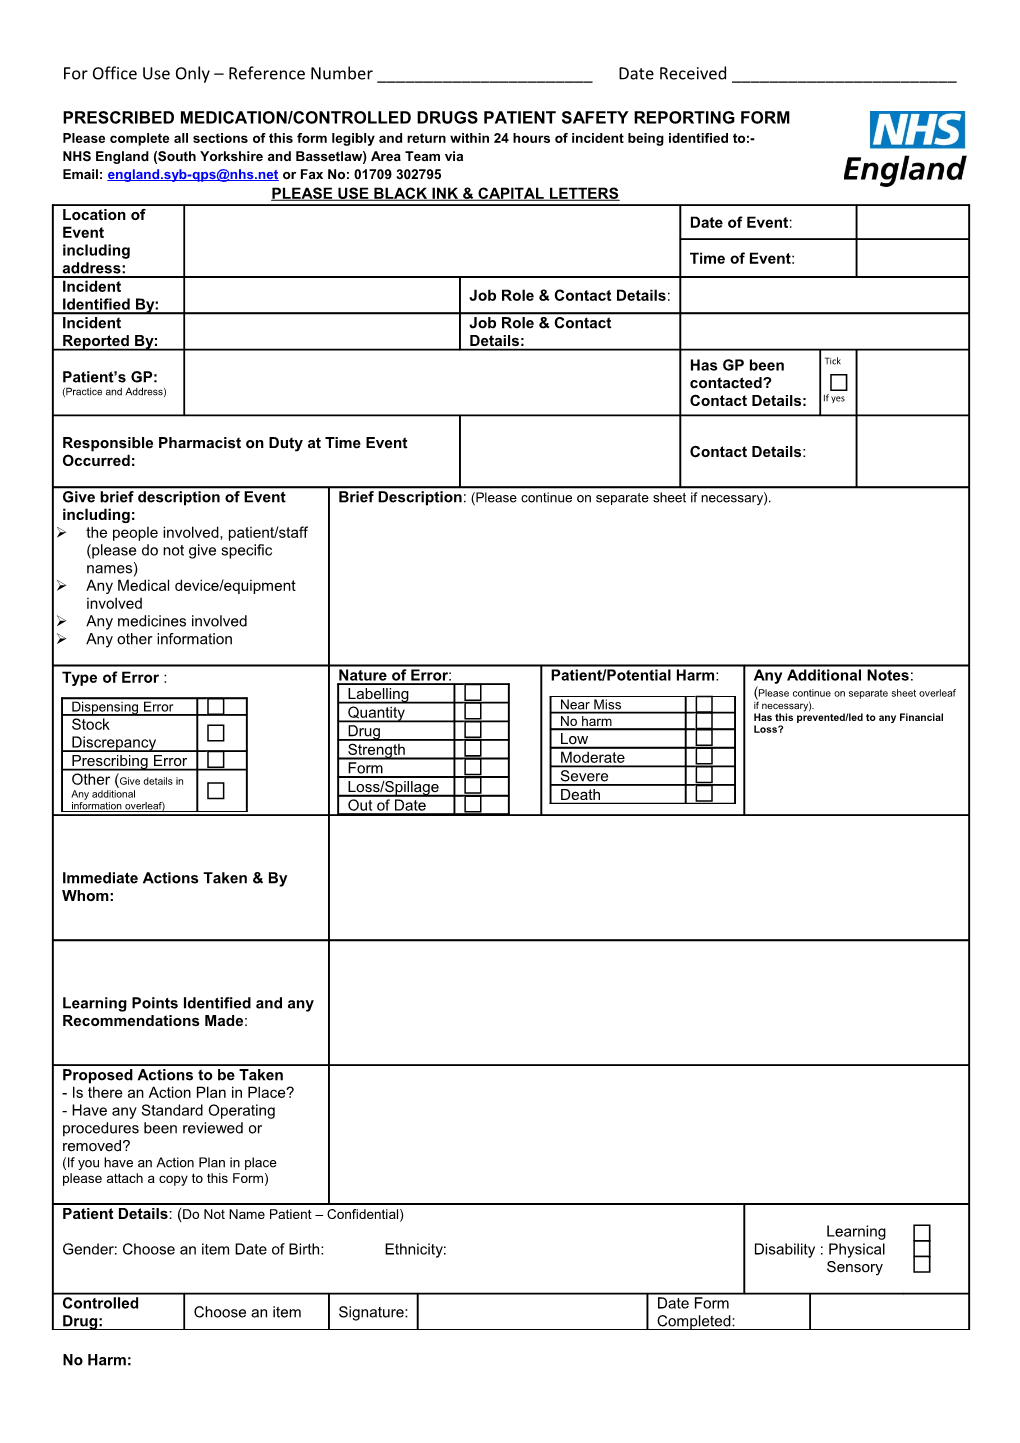 Prescribed Medication/Controlled Drugs Patient Safety Reporting Form